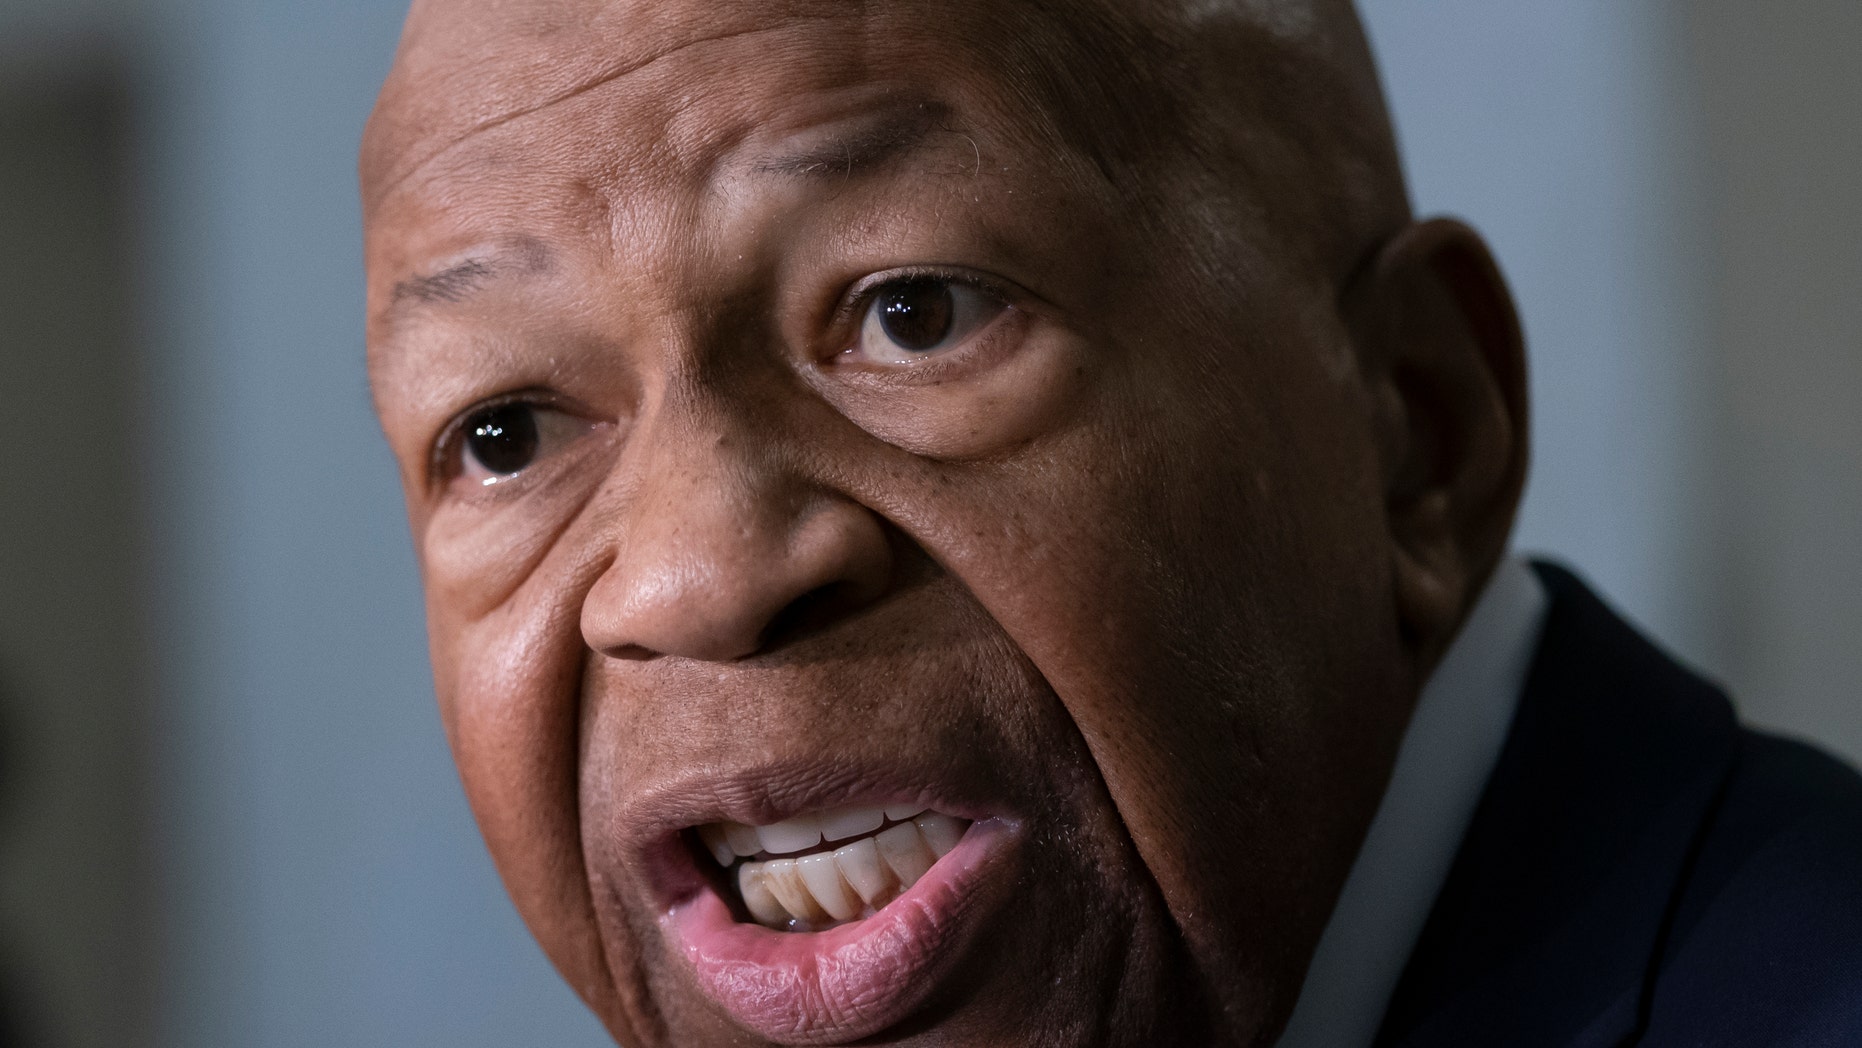 House Watch and Reform Committee Chair Elijah Cummings, D-Md., Told reporters the issuance of subpoenas as part of his investigation into persons under the administration of President Donald Trump to whom a security clearance had been granted 